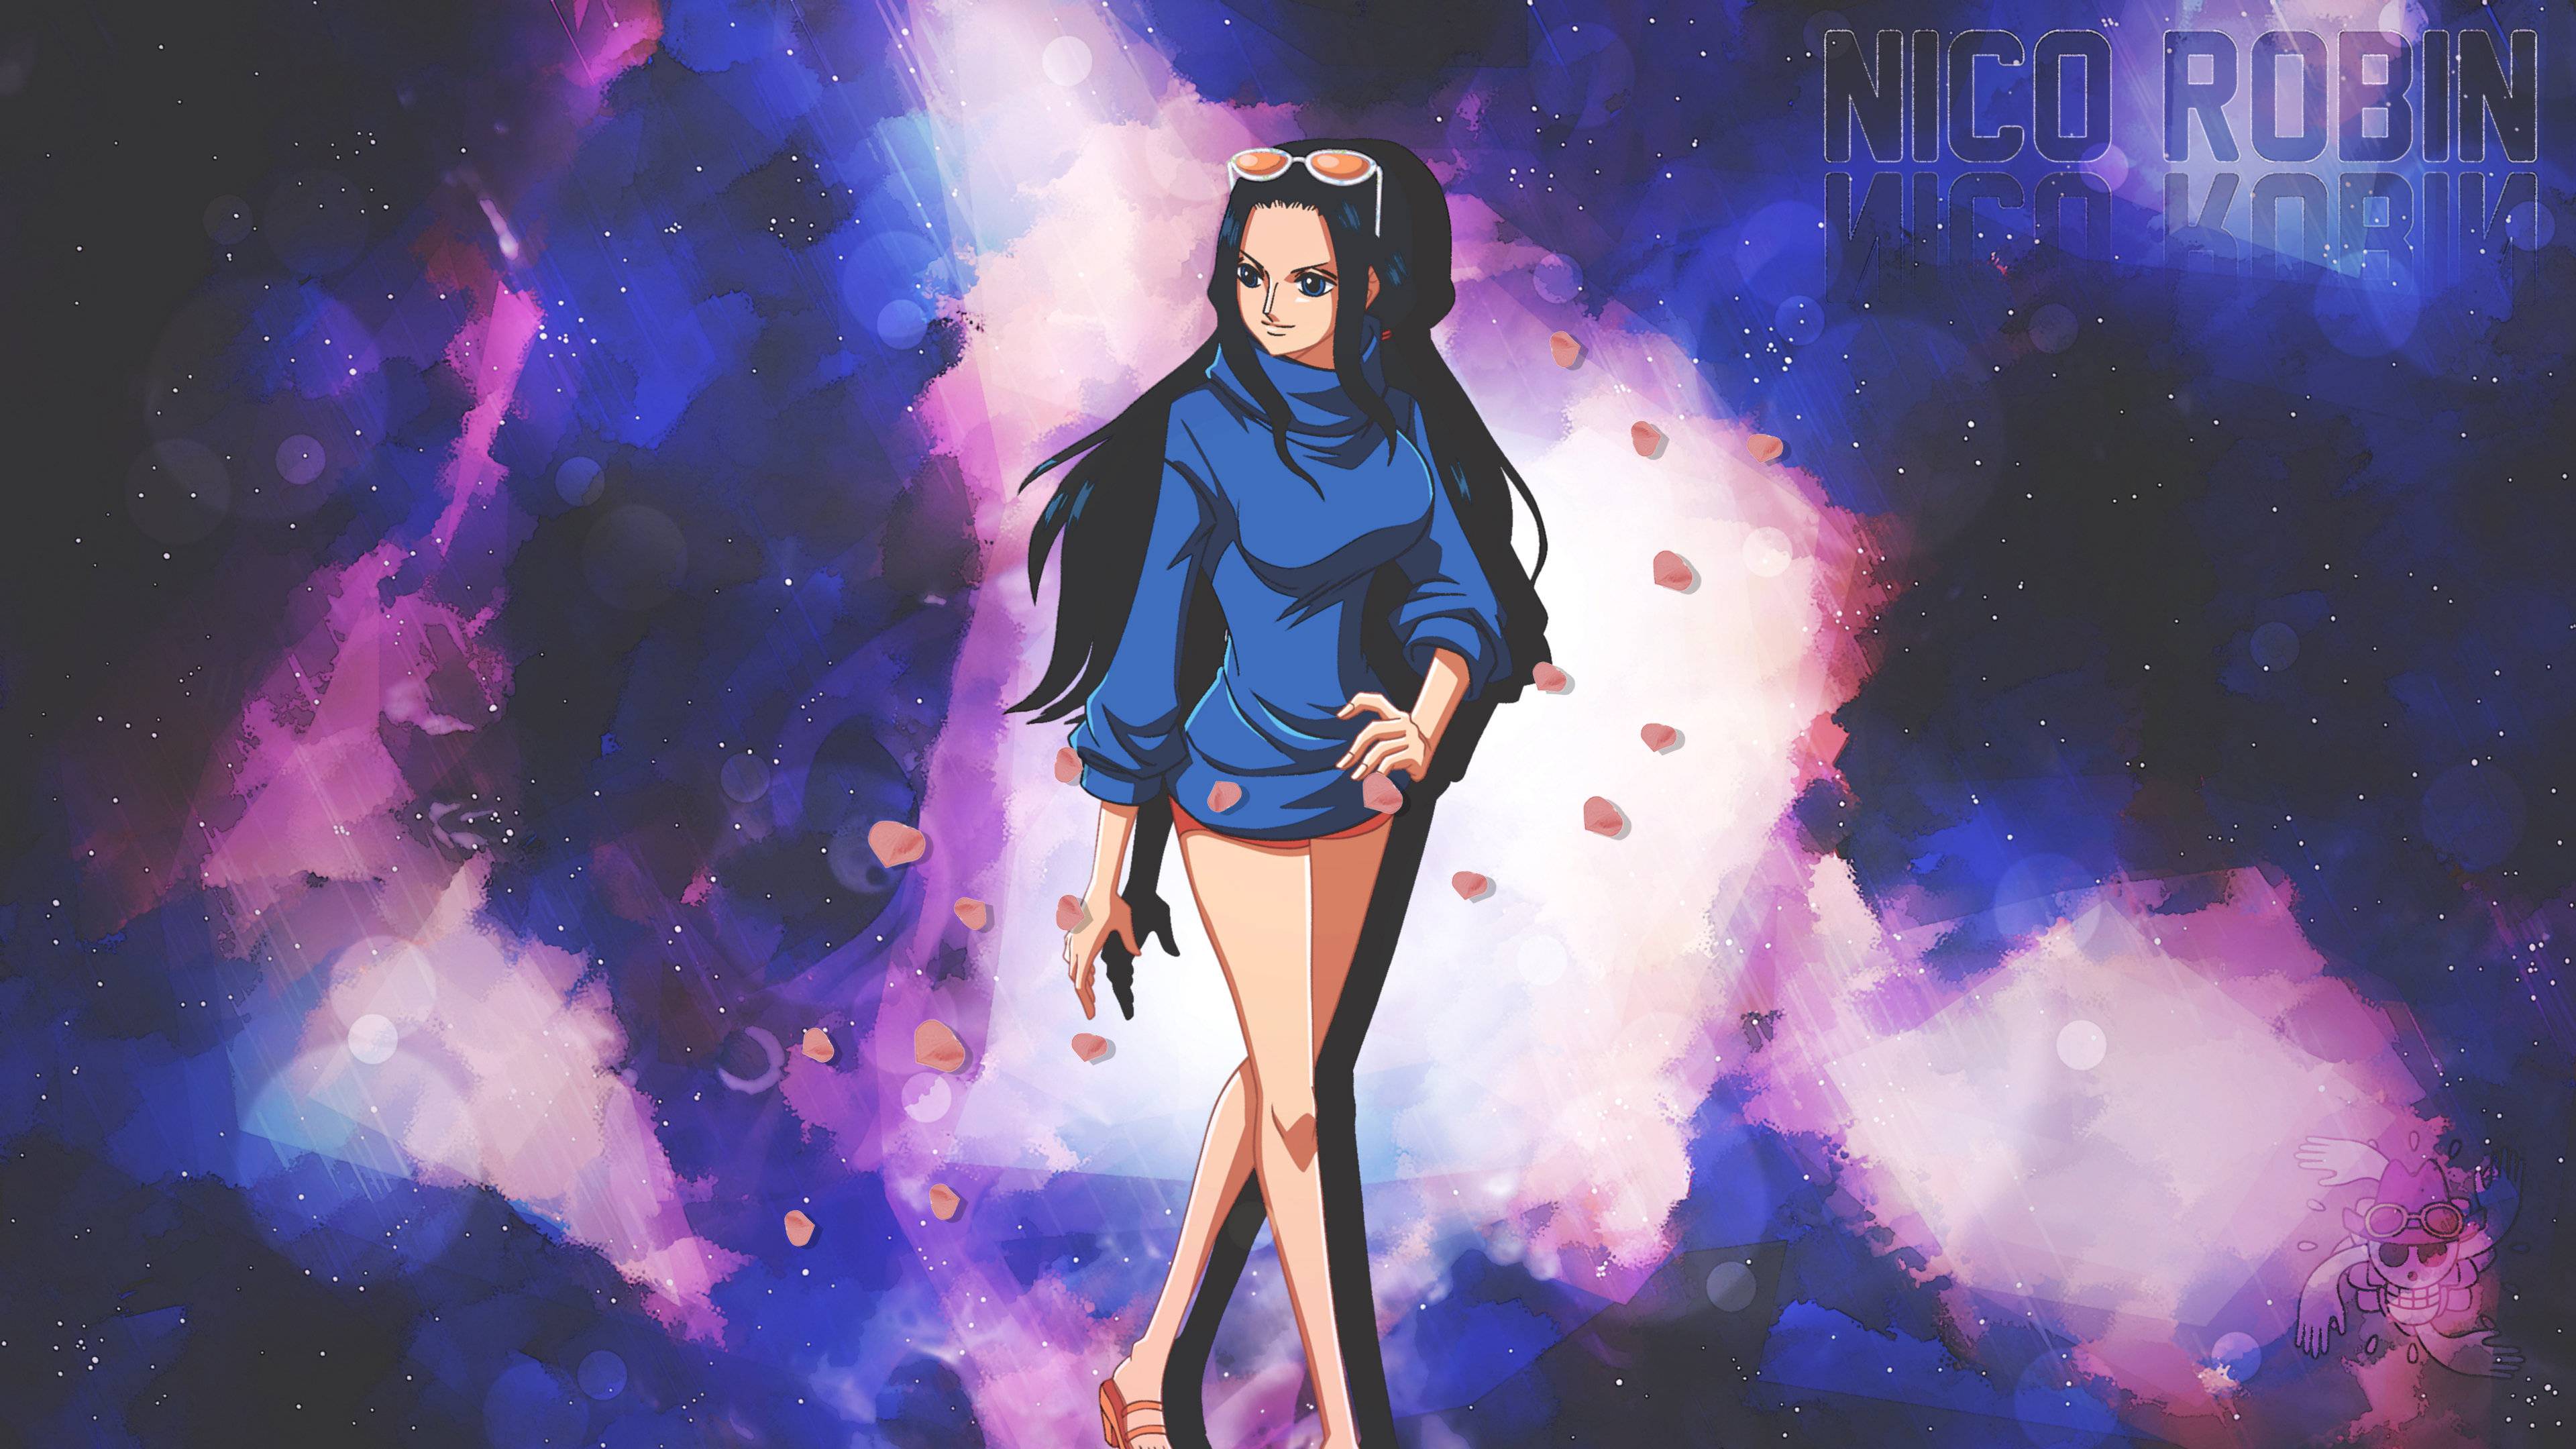 Nico Robin wallpapers HD for desktop backgrounds.